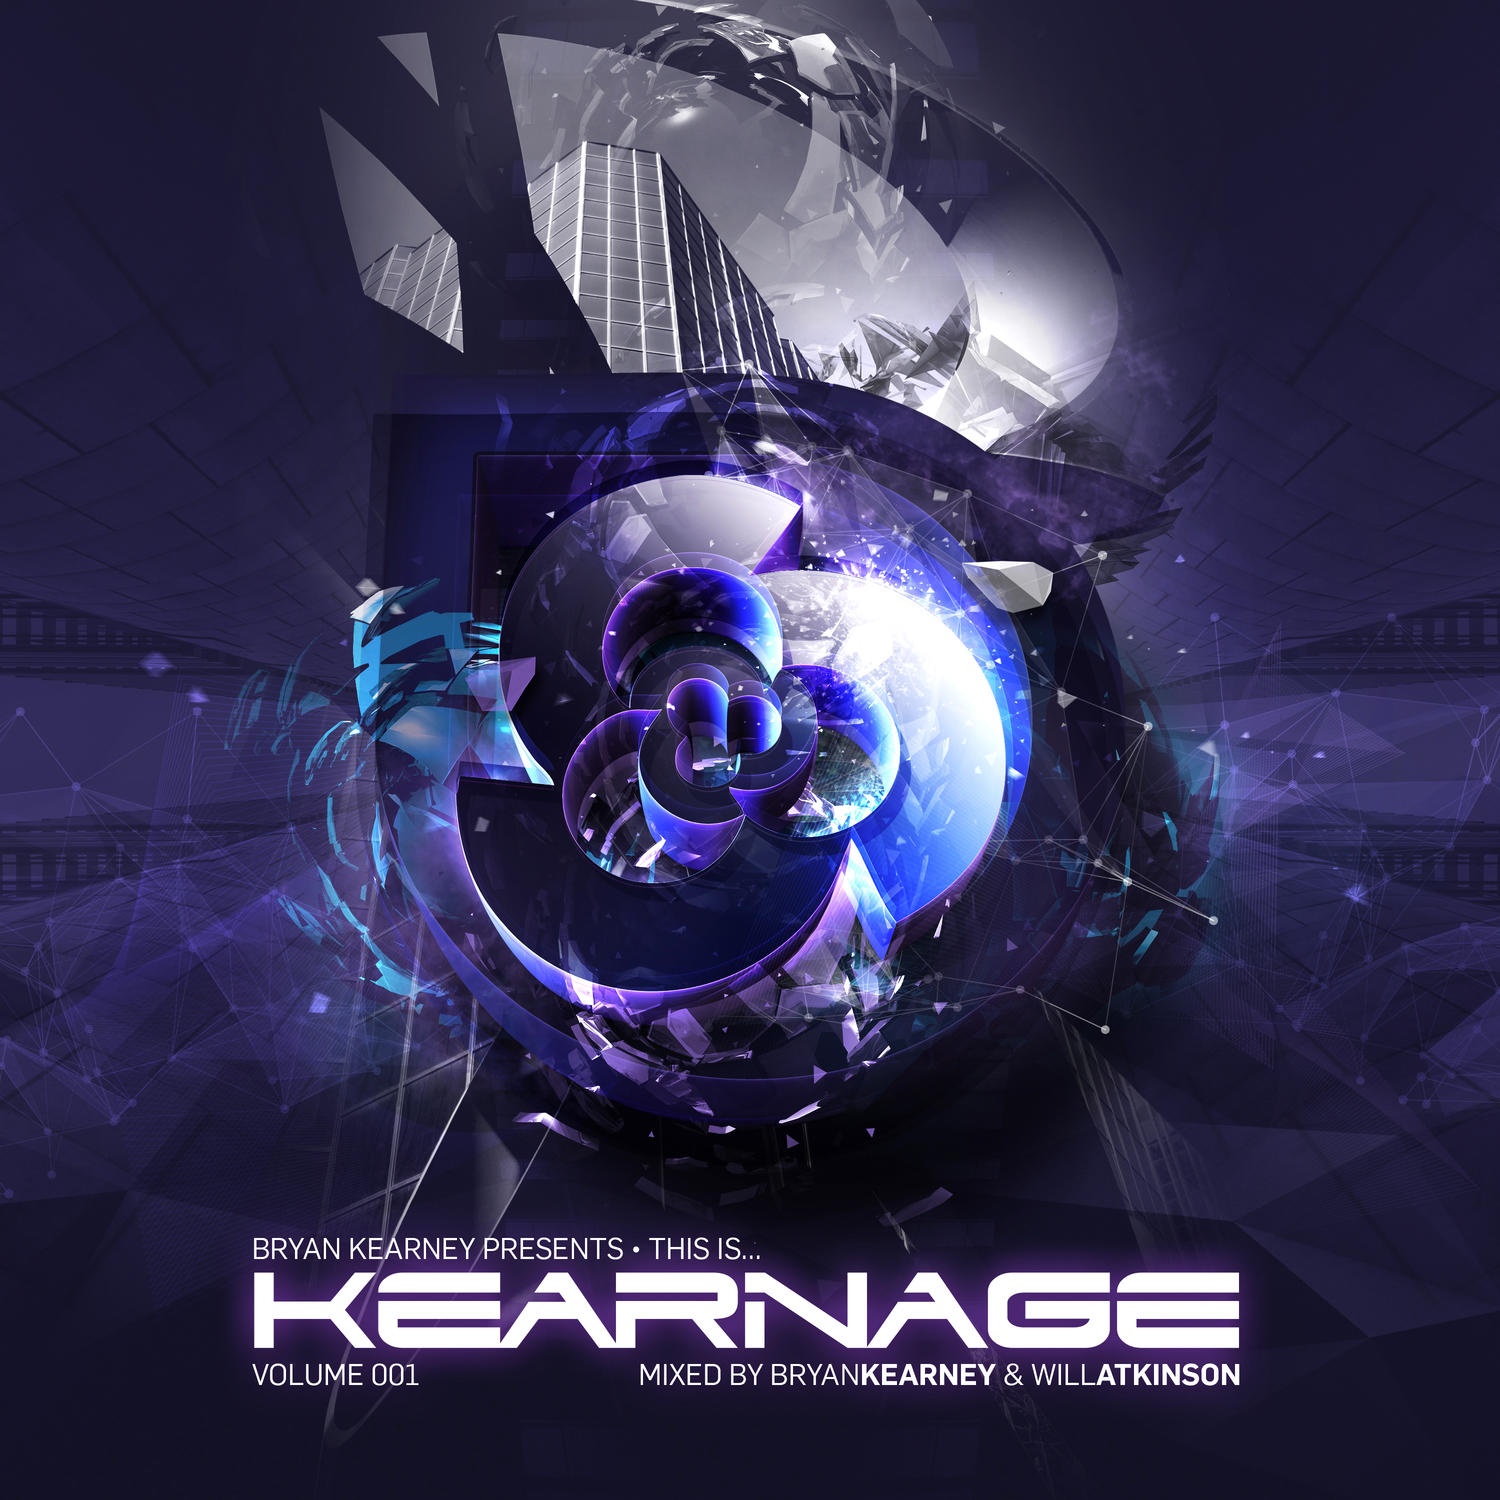 This Is... Kearnage 001